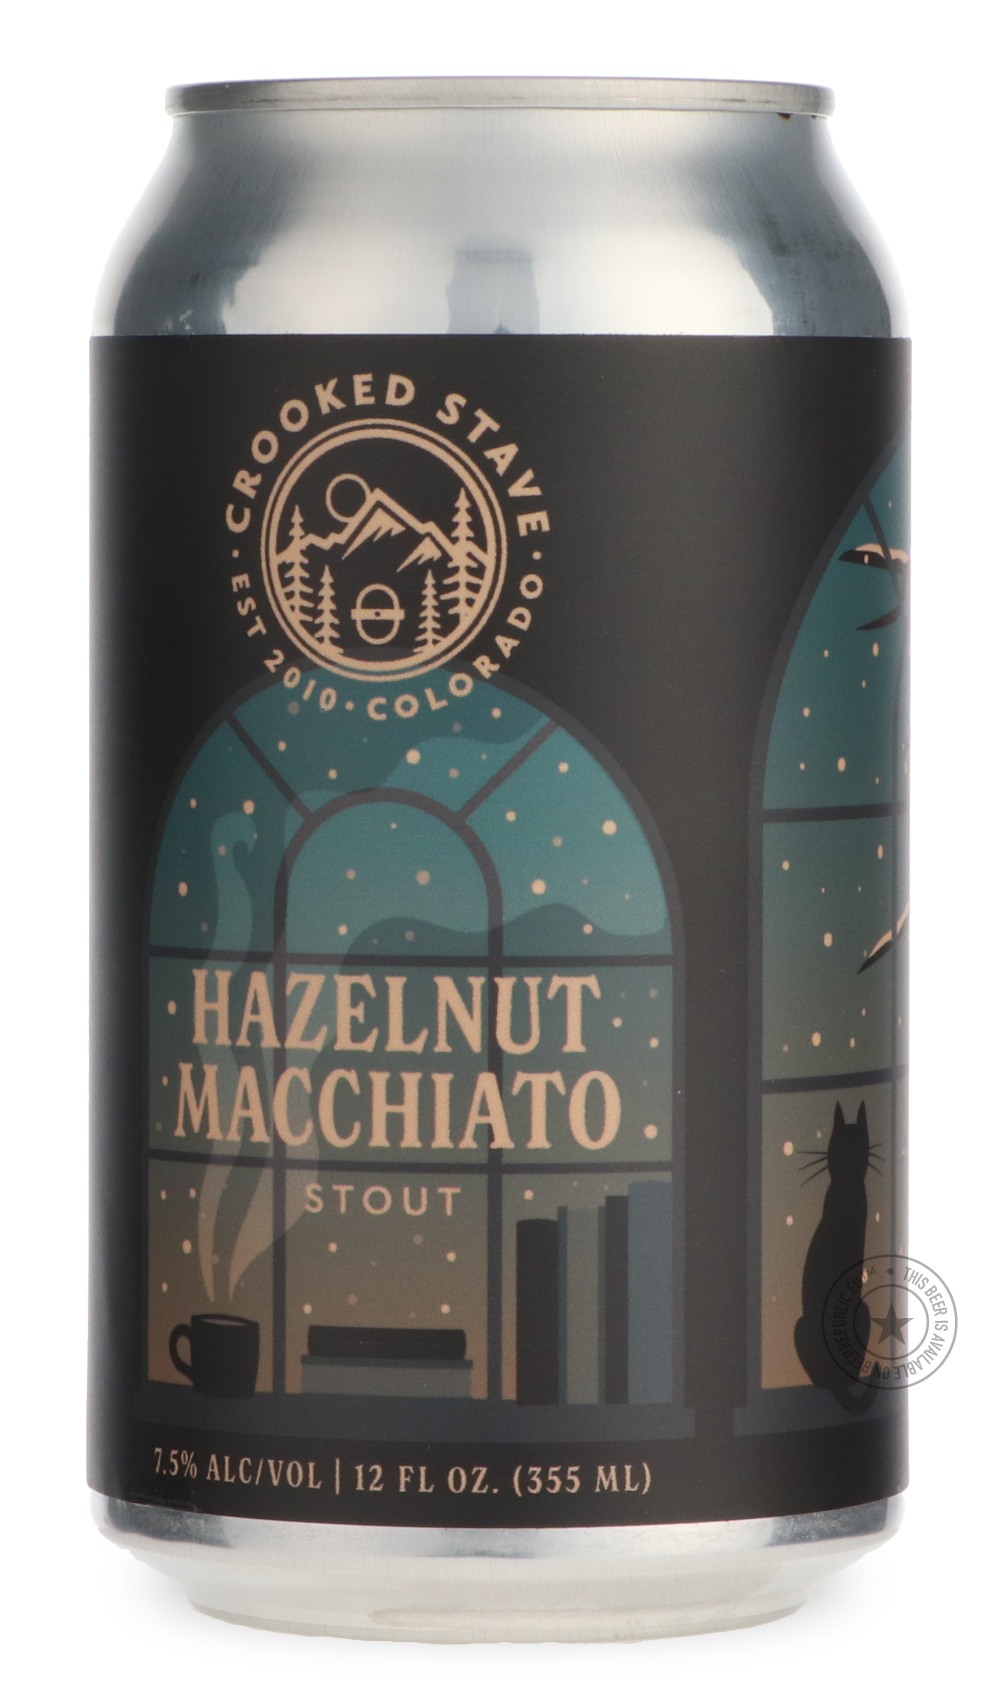 -Crooked Stave- Hazelnut Macchiato Stout-Stout & Porter- Only @ Beer Republic - The best online beer store for American & Canadian craft beer - Buy beer online from the USA and Canada - Bier online kopen - Amerikaans bier kopen - Craft beer store - Craft beer kopen - Amerikanisch bier kaufen - Bier online kaufen - Acheter biere online - IPA - Stout - Porter - New England IPA - Hazy IPA - Imperial Stout - Barrel Aged - Barrel Aged Imperial Stout - Brown - Dark beer - Blond - Blonde - Pilsner - Lager - Wheat 